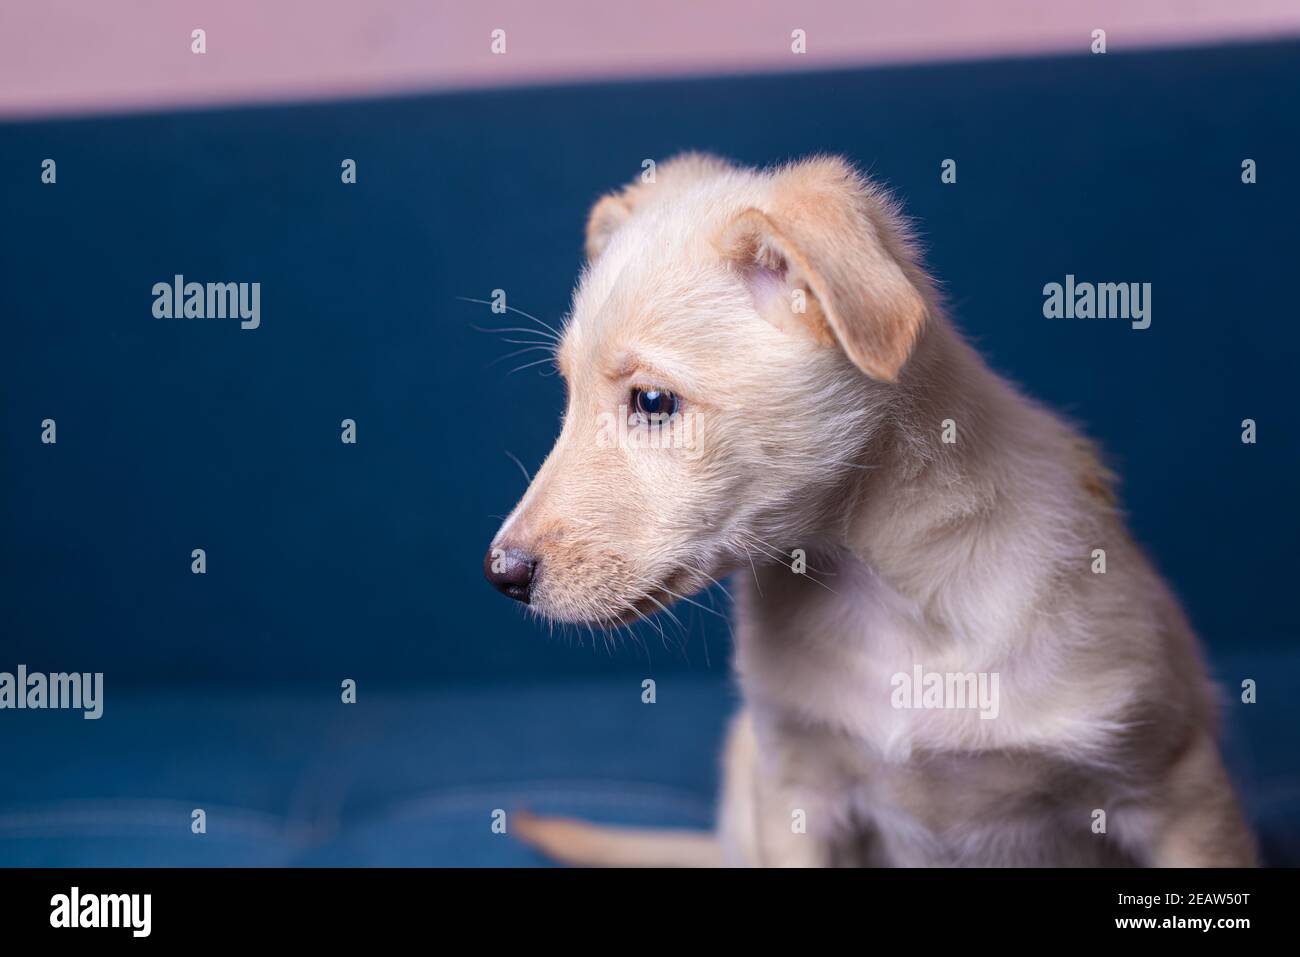 Close up portrait of cute little mongrel puppy with light fur on blue background Stock Photo